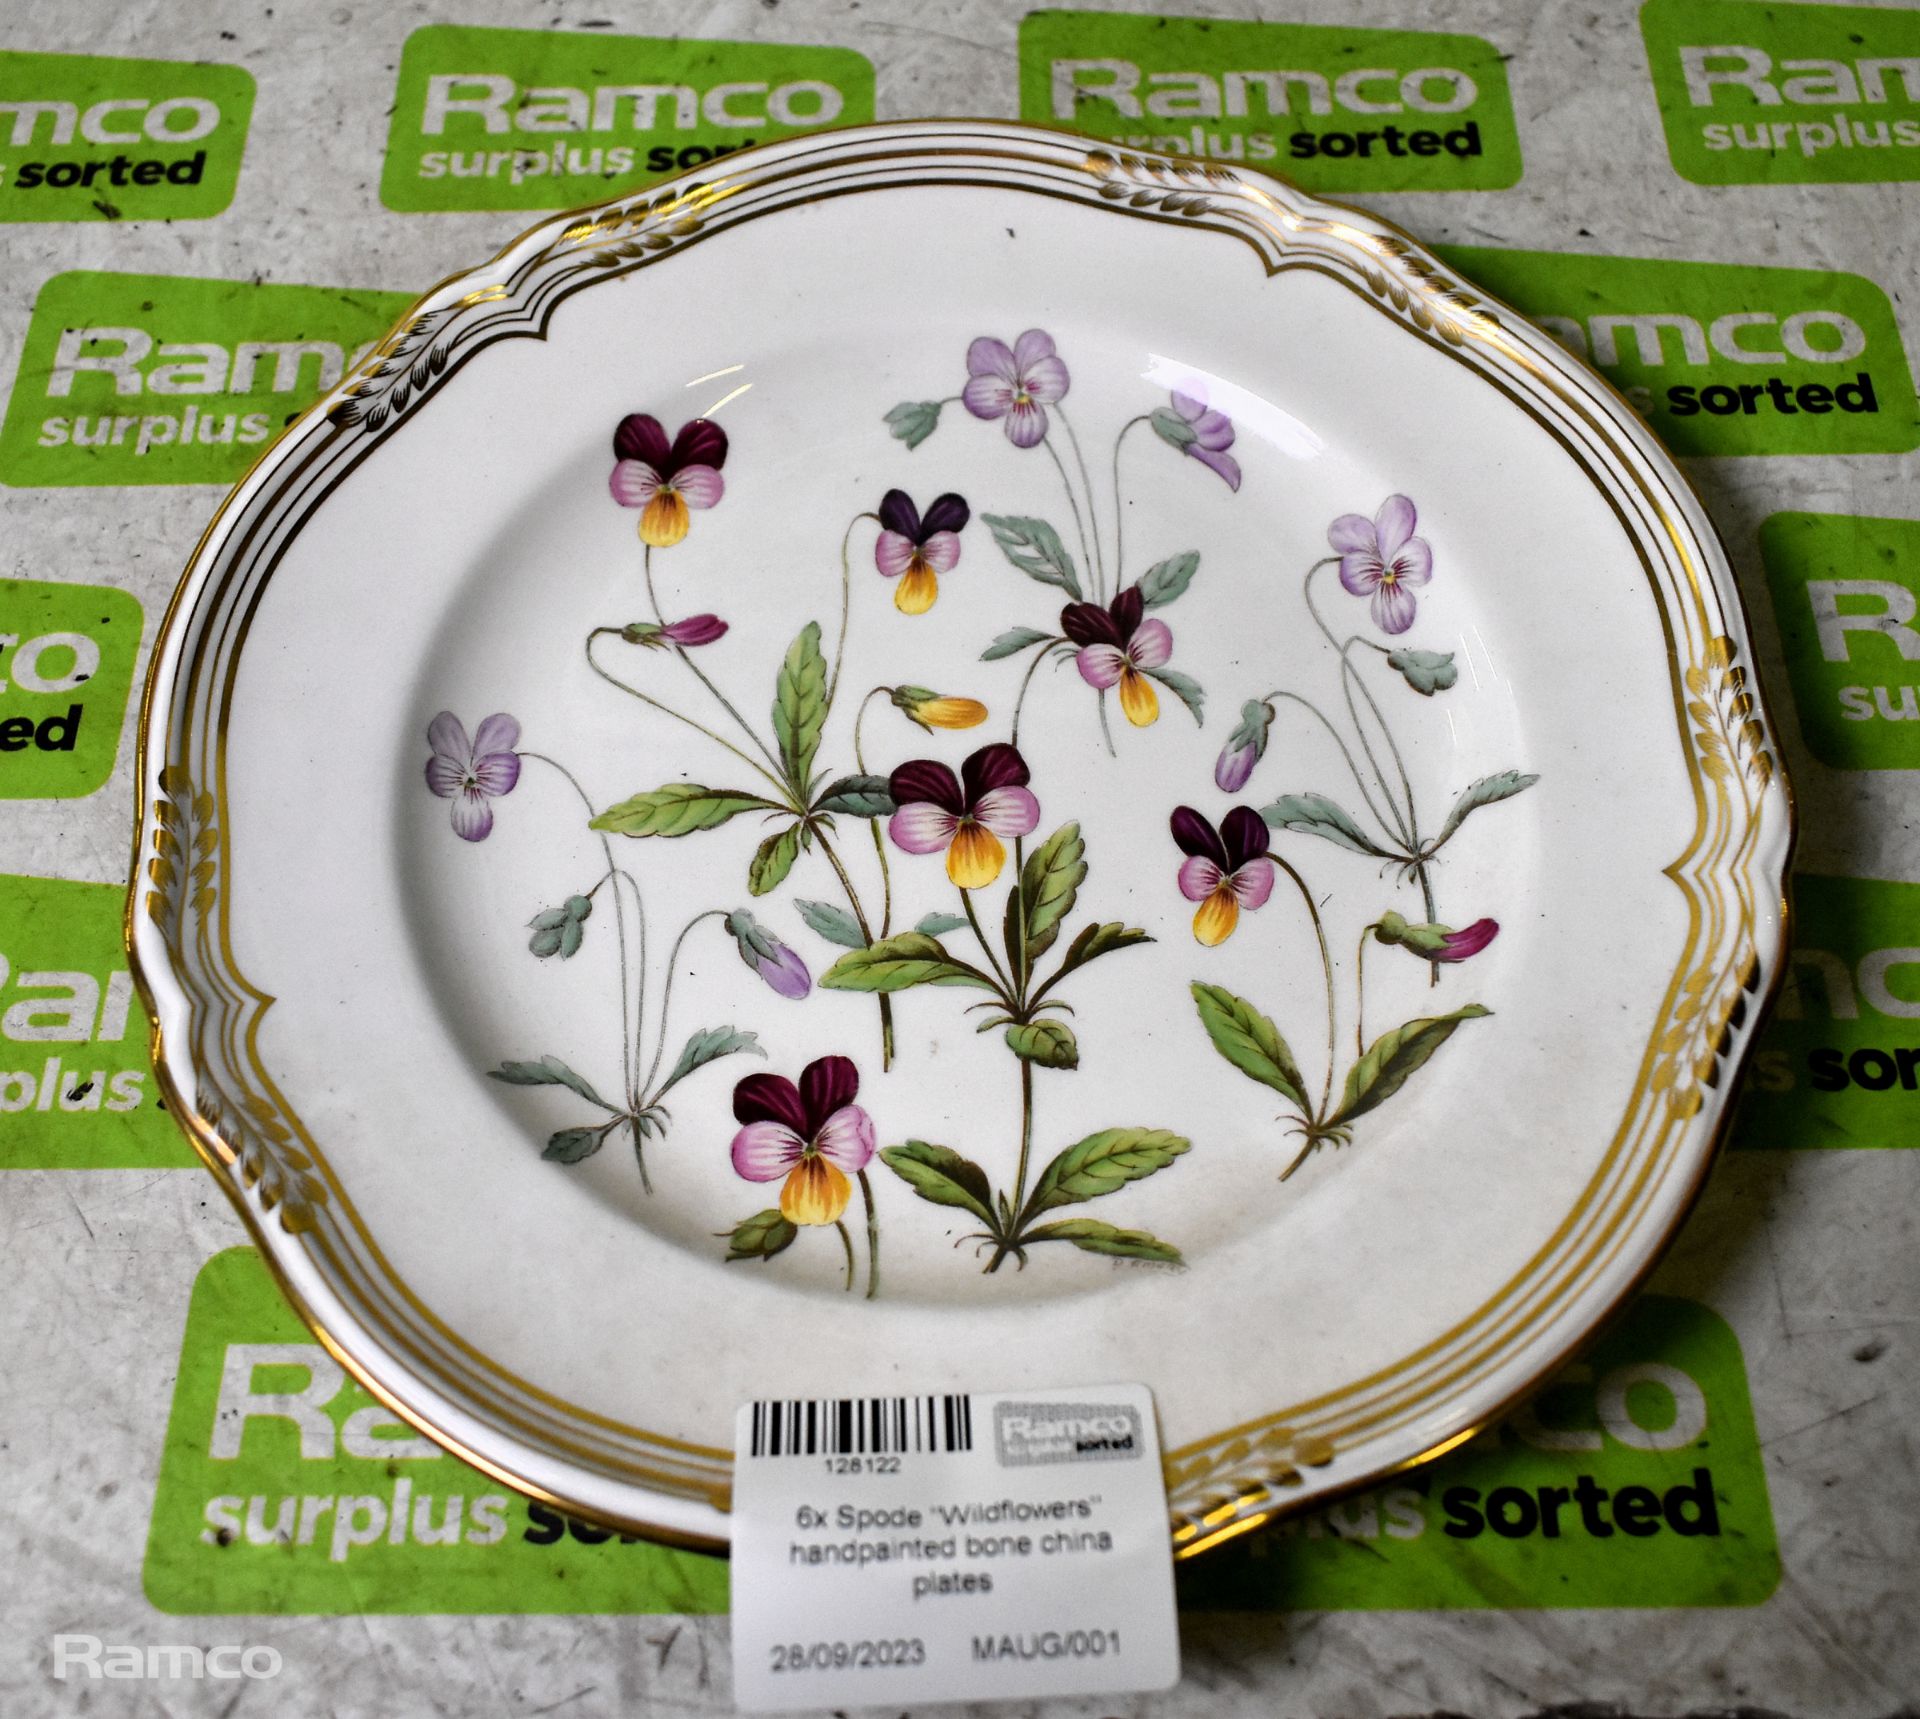 6x Spode - Wild Flowers - hand painted bone china plates - Image 12 of 13